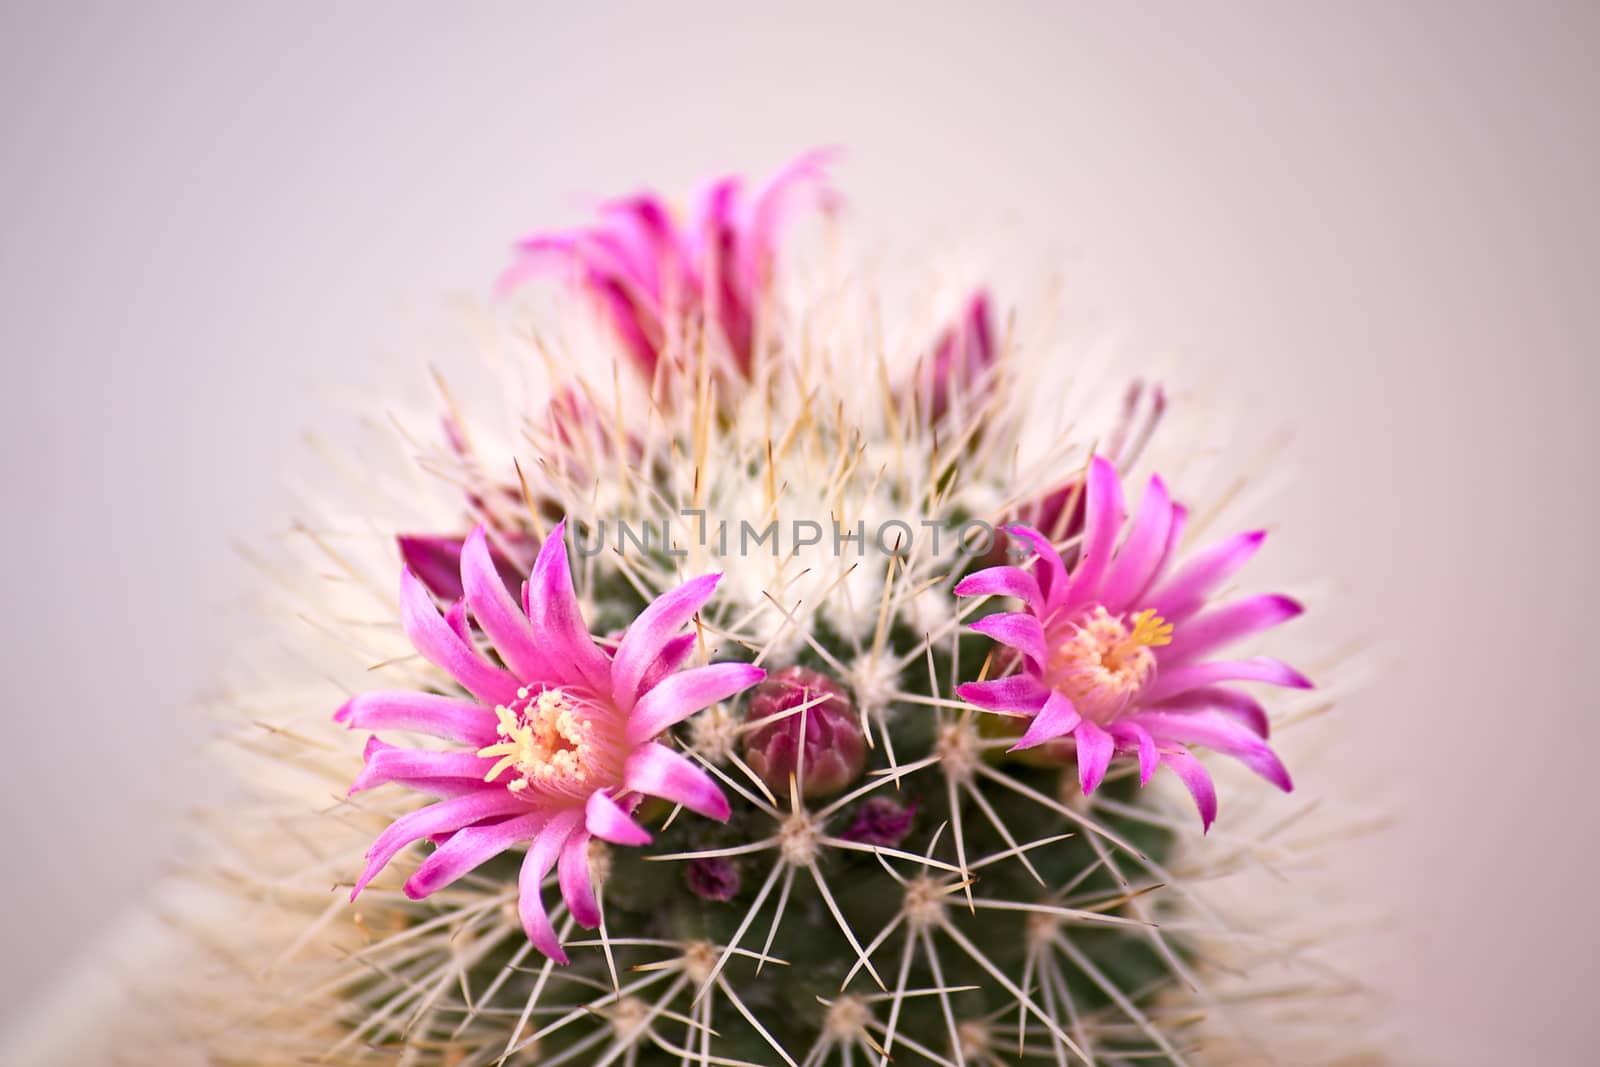 Cactus flowers  on light background.Image with shallow depth of field.